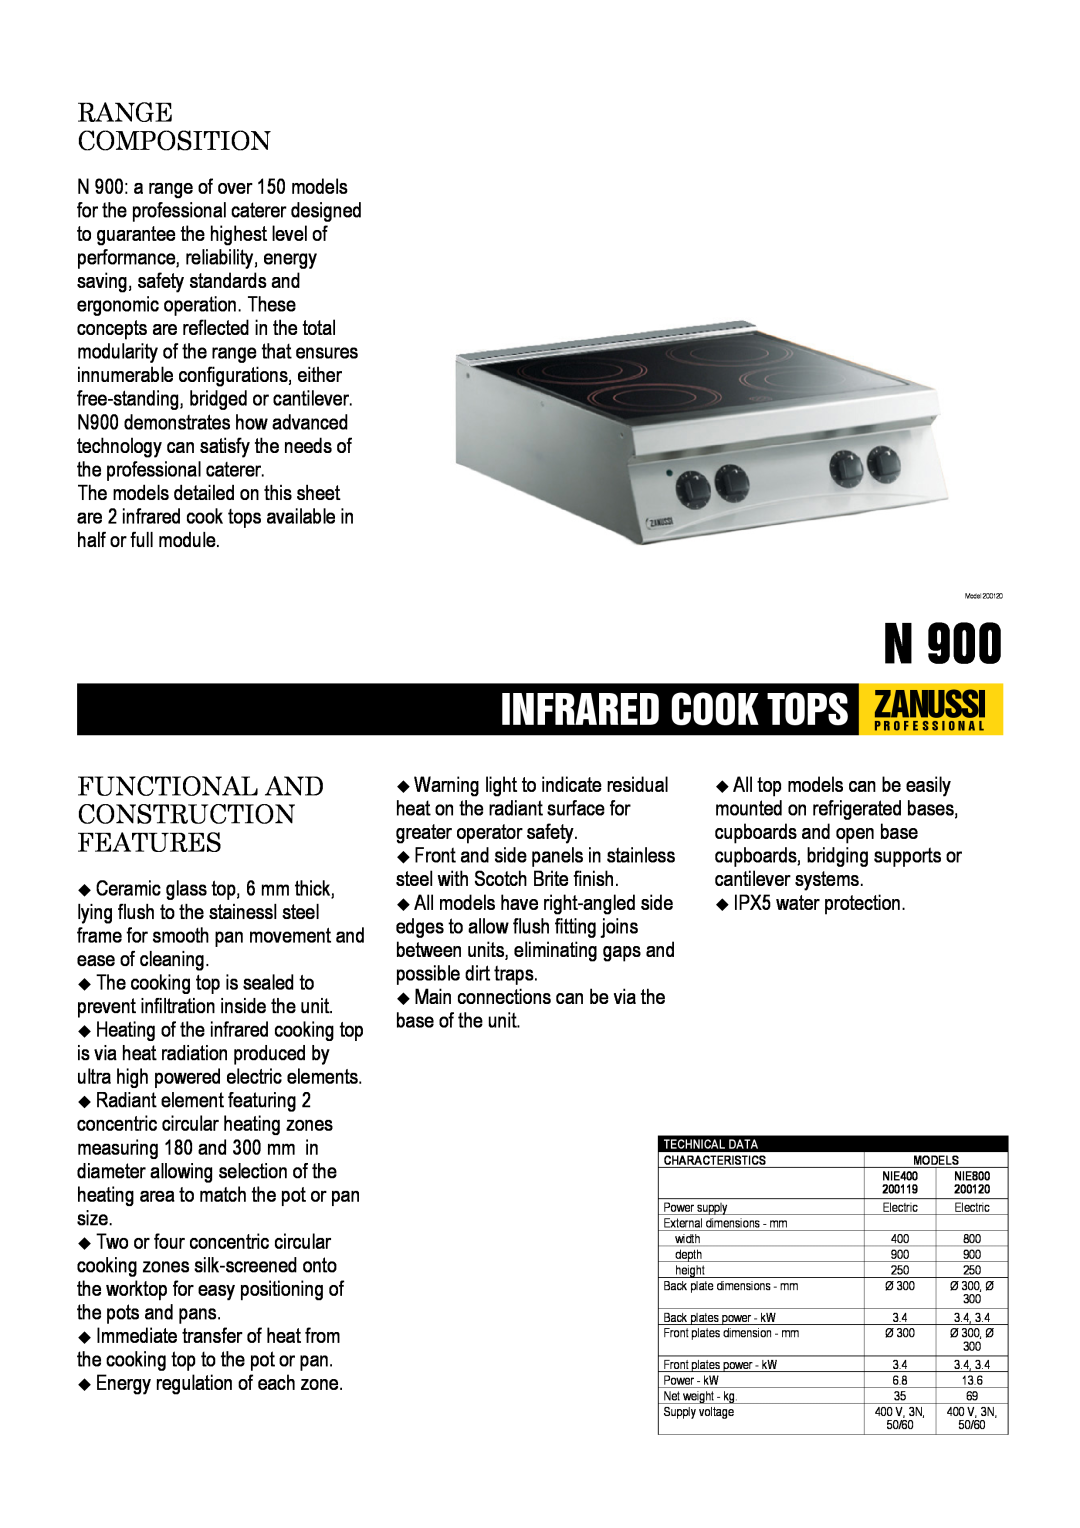 Zanussi NIE800, NIE400 dimensions Zanussi, Infrared Cook Tops, Range Composition, Functional And Construction Features 